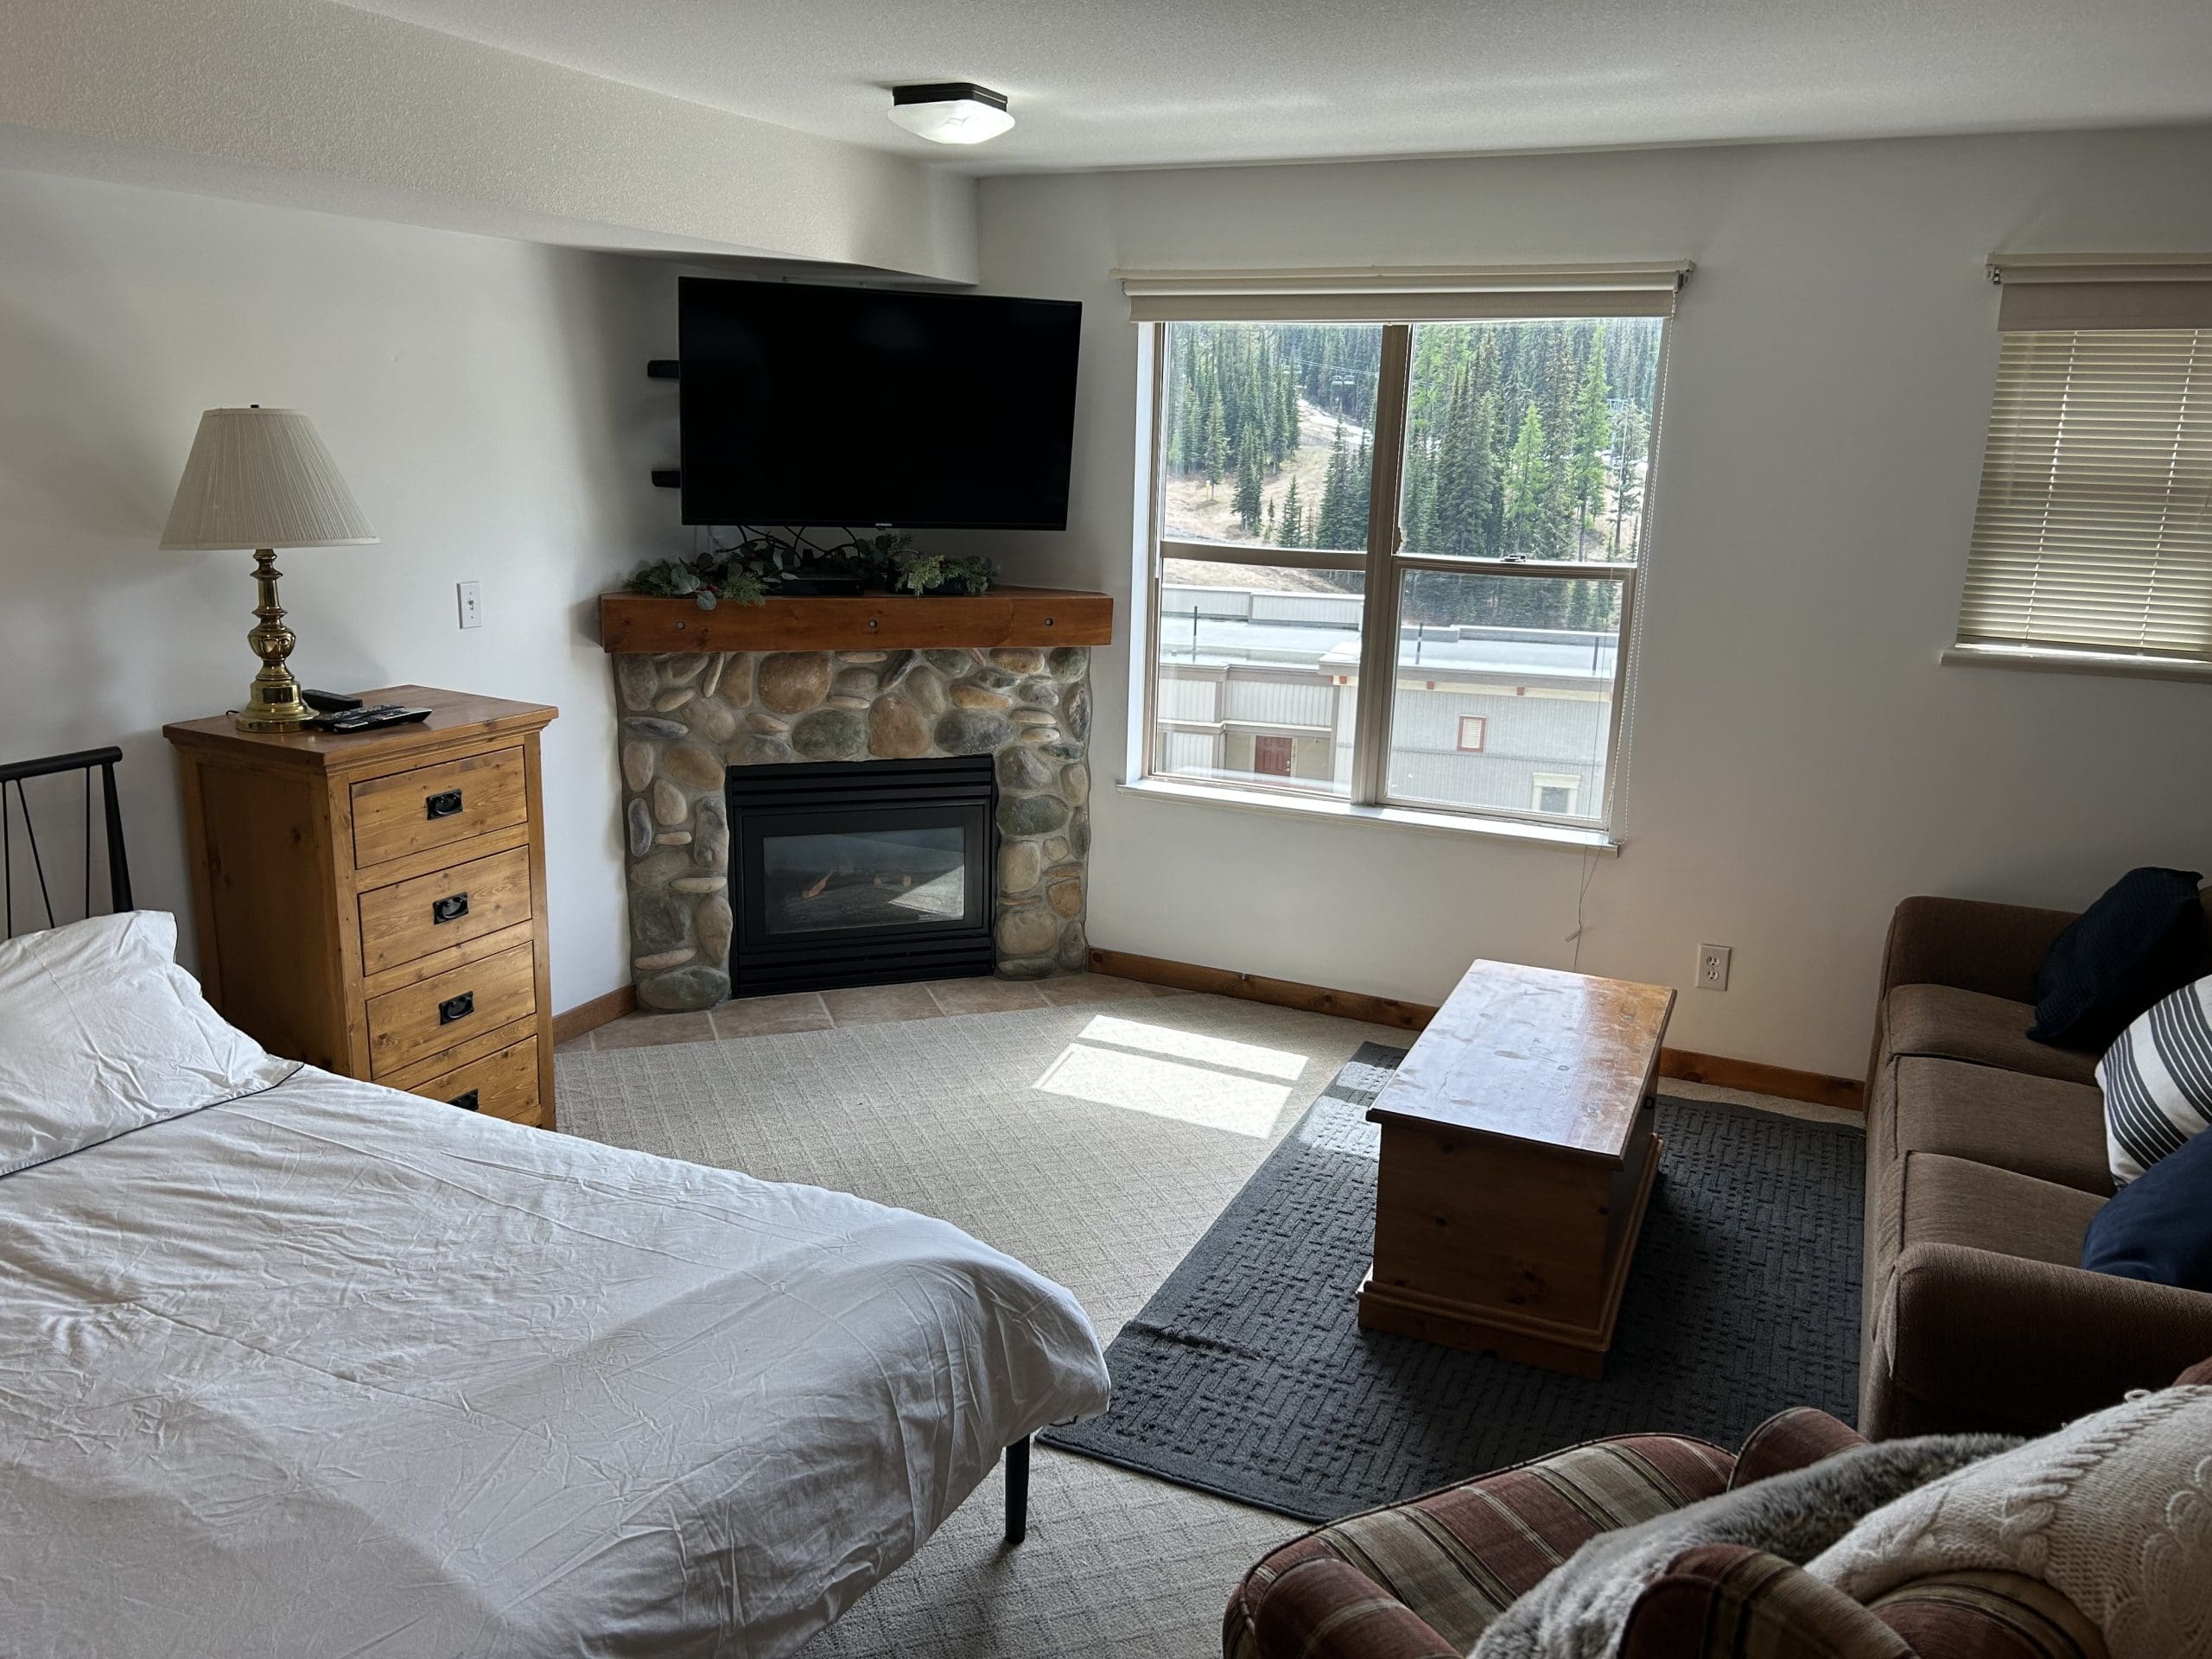 Quiet top floor studio condo at Creekside complex. Bright windows with views overlooking Tube Town and the Silver Queen Chair. Gas fireplace, TV, free parking and shared outdoor hot tub.